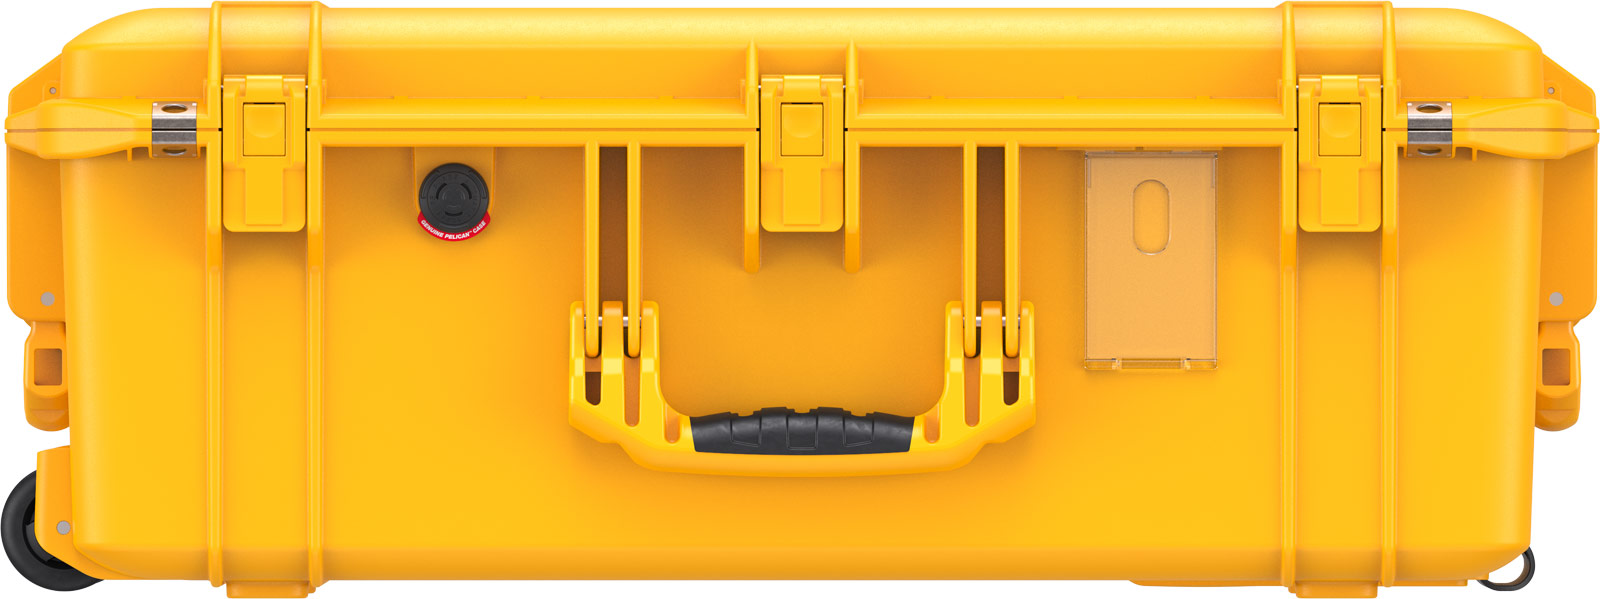 pelican 1595 air case yellow side